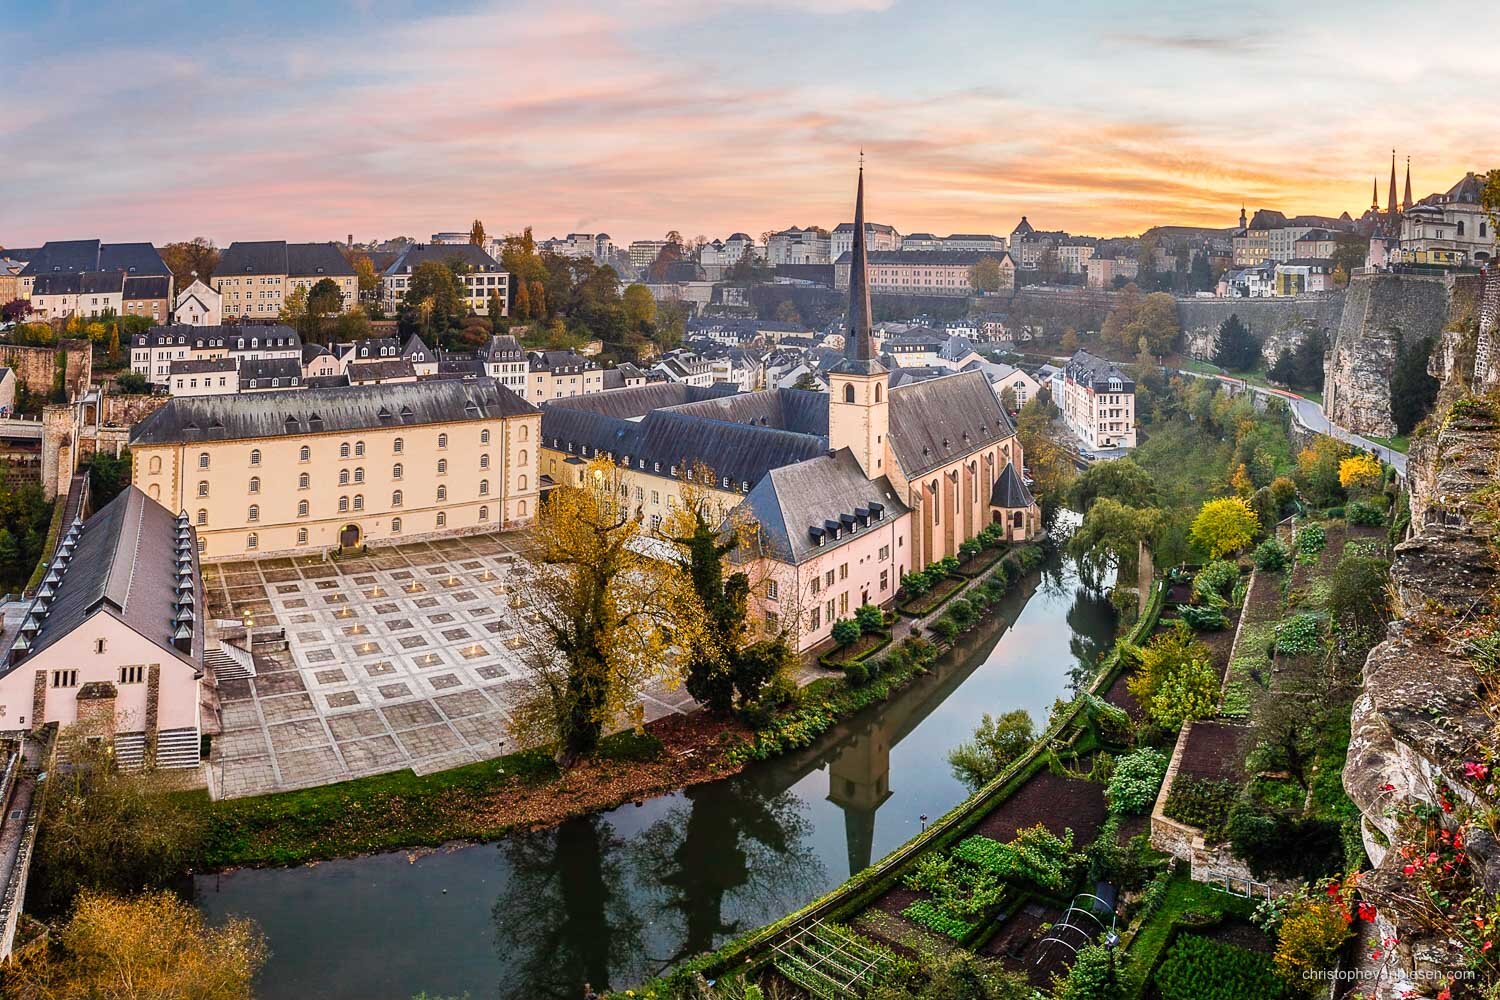 Photography Workshop - Luxembourg City - Photo Course - UNESCO World Heritage Site - Sunset over Luxembourg City's Grund neighbourhood during Autumn - Golden Season